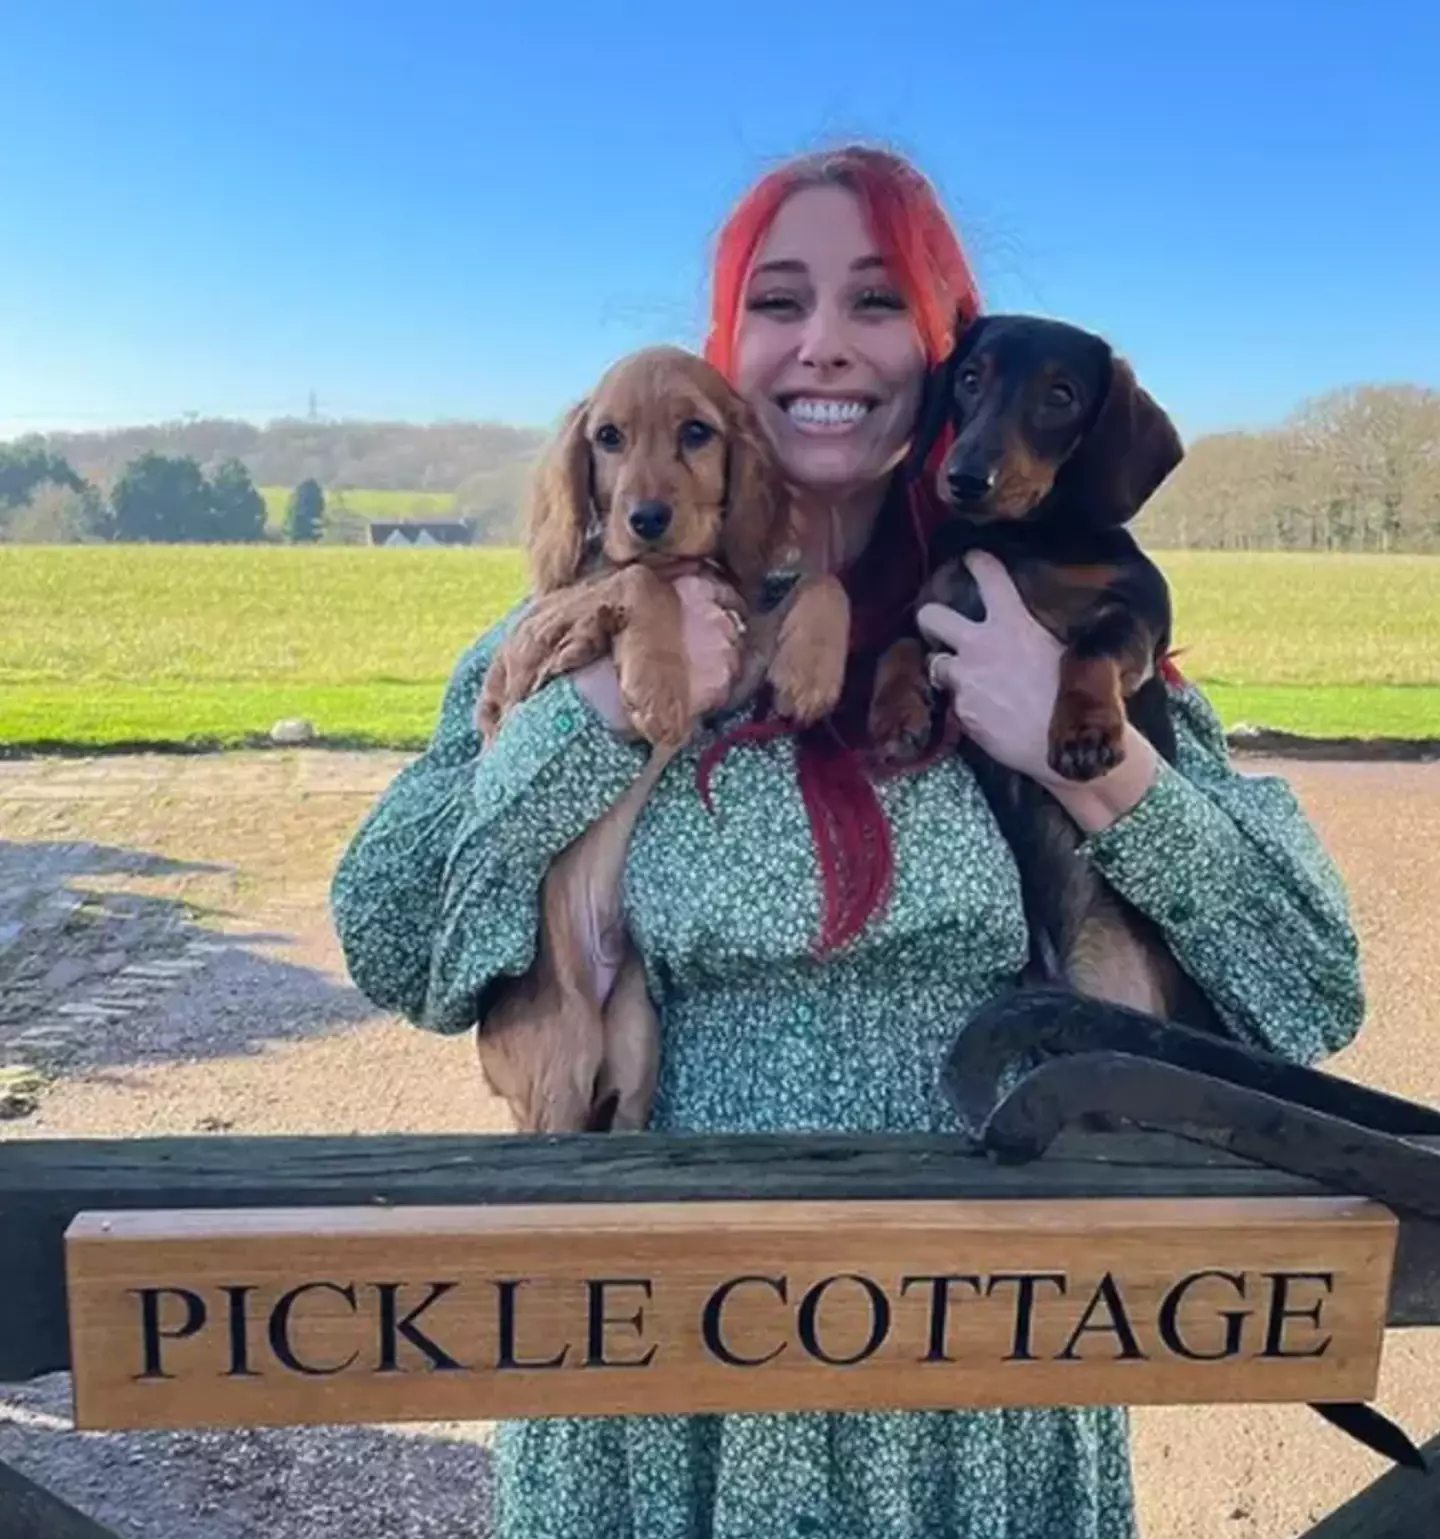 Stacey Solomon and Joe Swash moved to Pickle Cottage in 2020.